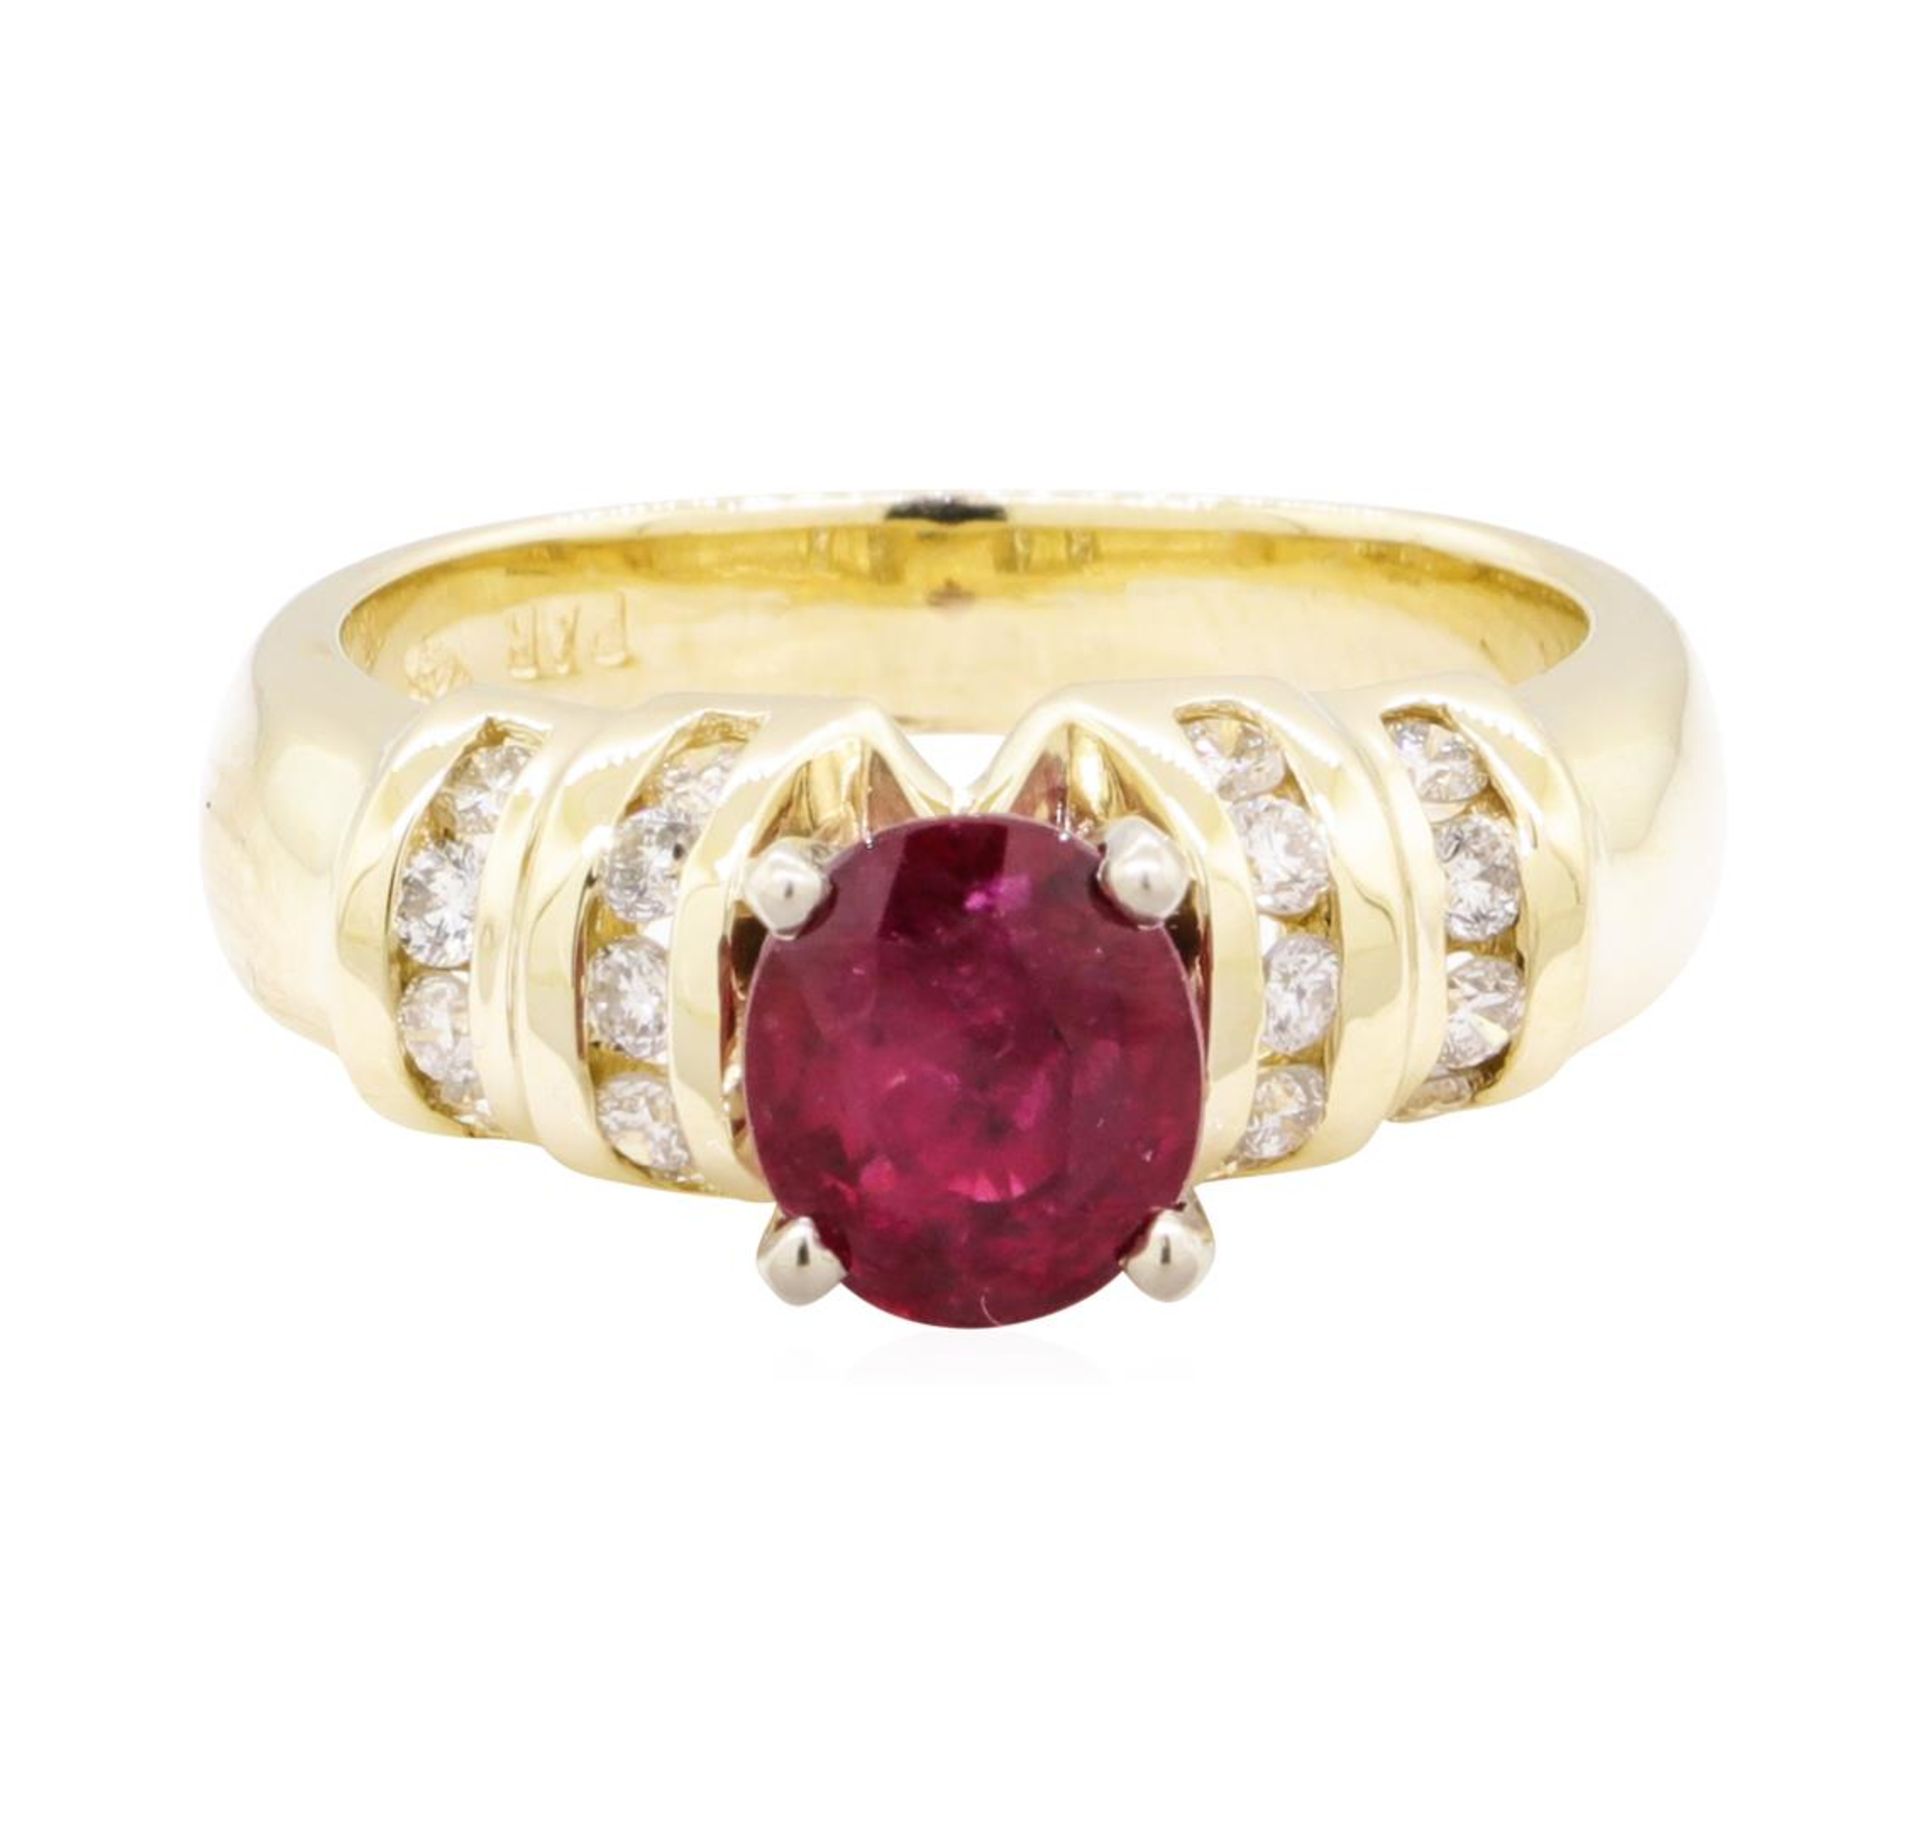 1.67 ctw Ruby And Diamond Ring - 14KT Yellow Gold - Image 3 of 10